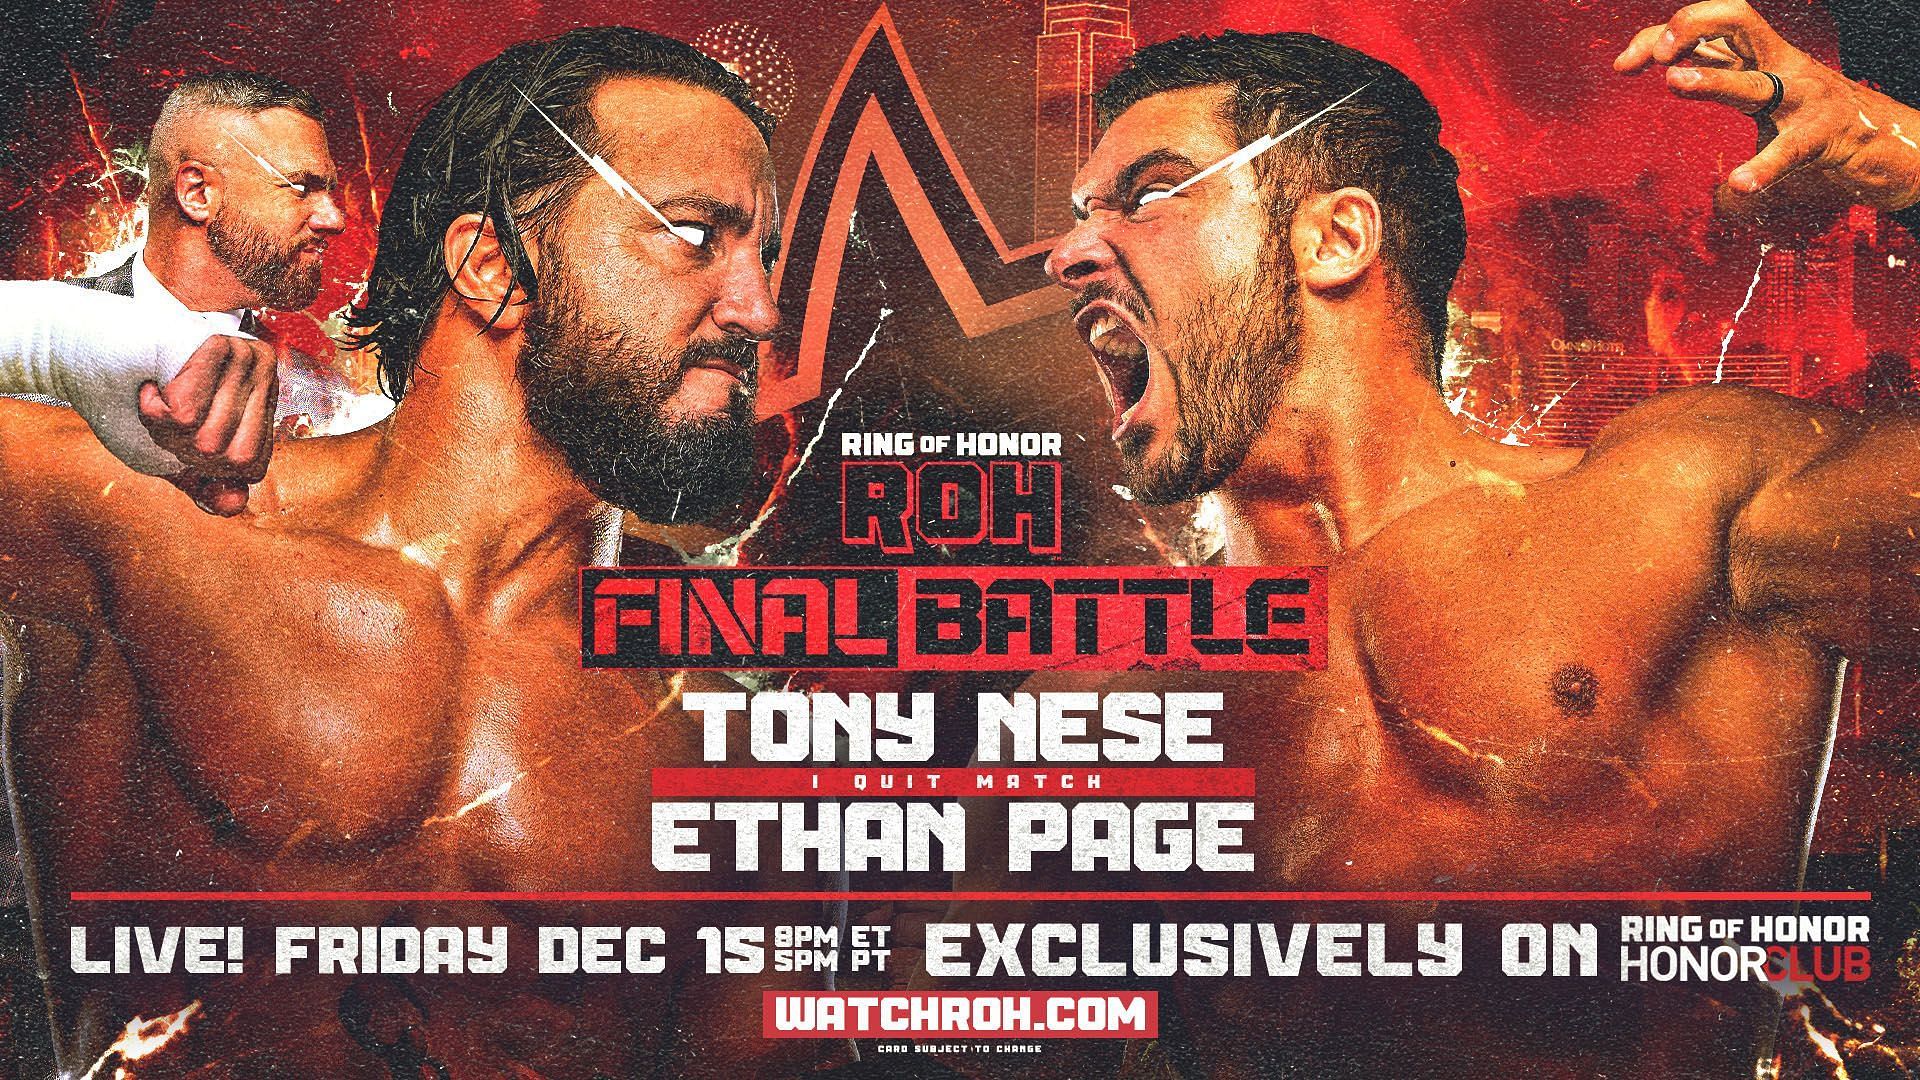 Ethan Page defeated Tony Nese in an 